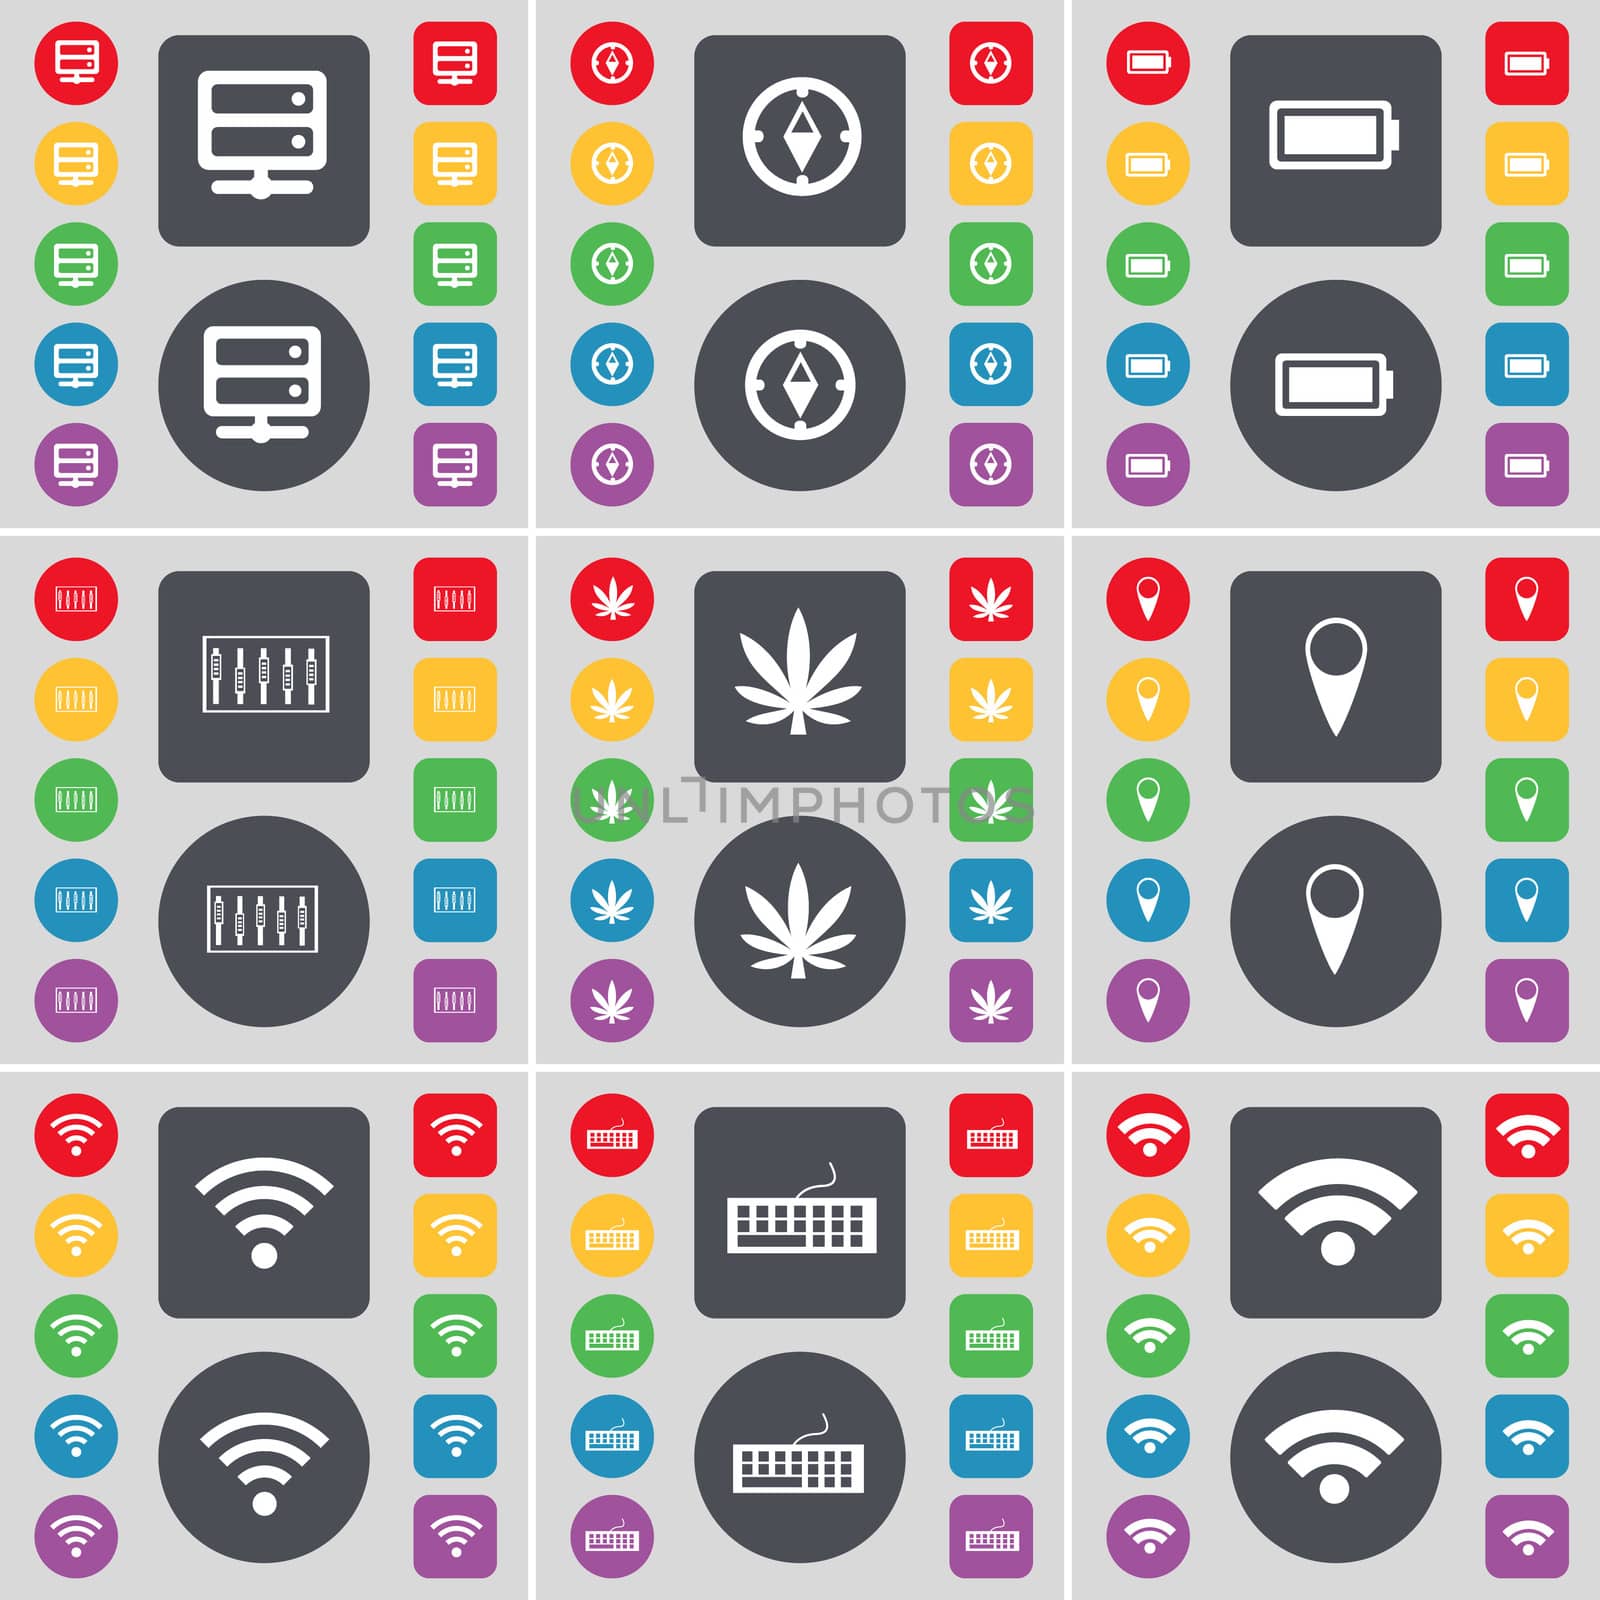 Server, Compass, Battery, Equalizer, Marijuana, Checkpoint, Wi-Fi, Keyboard icon symbol. A large set of flat, colored buttons for your design. illustration